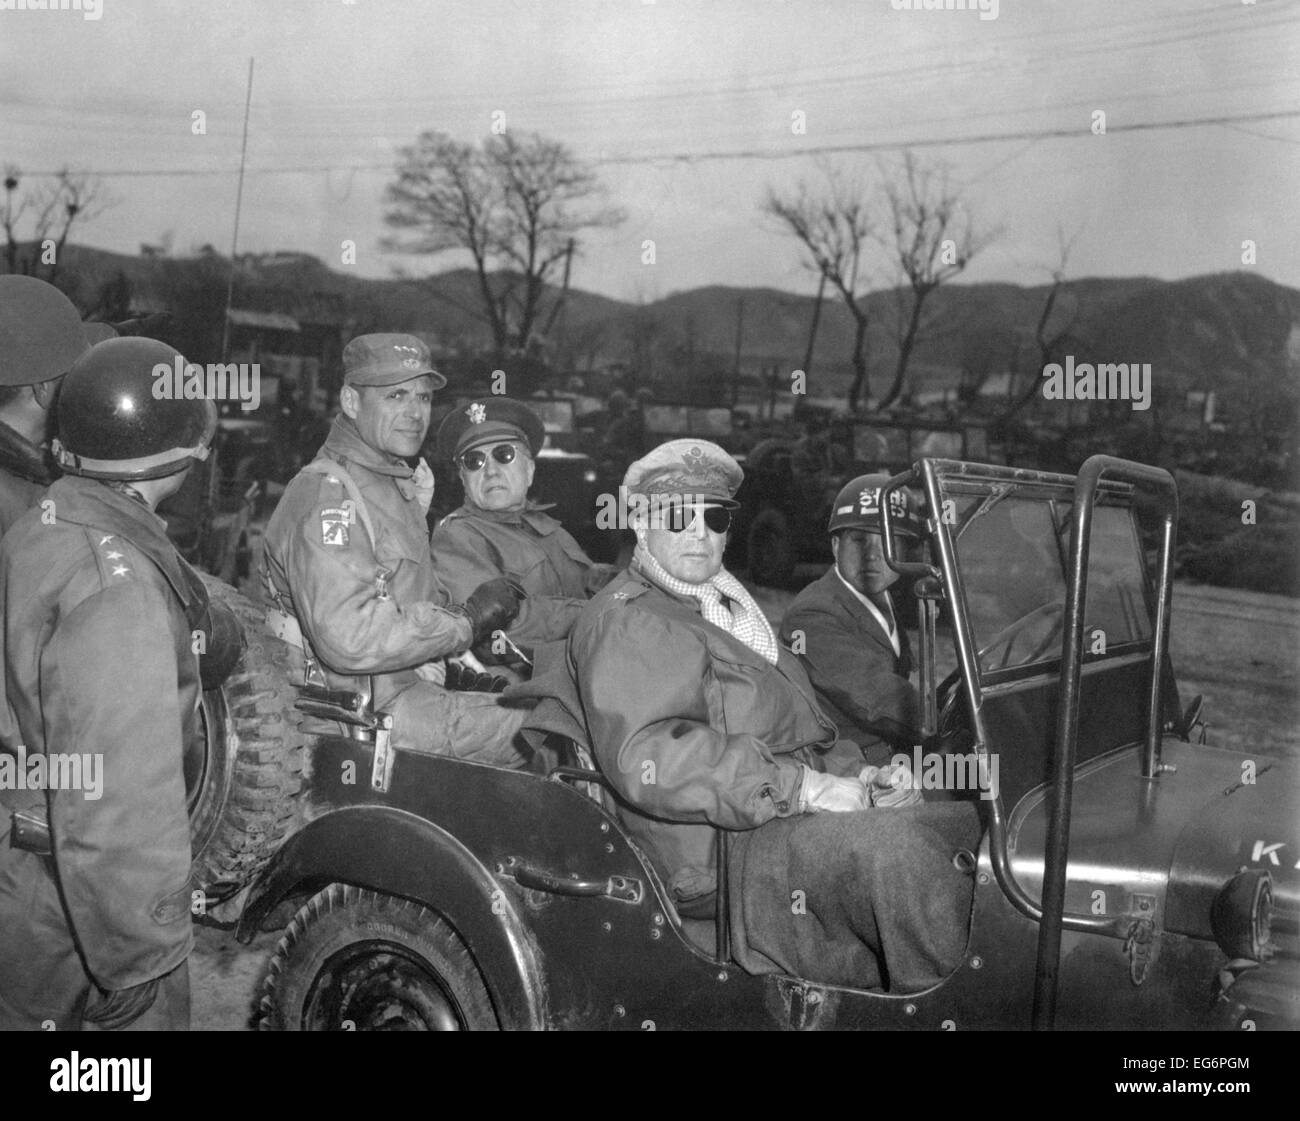 Commanders of U.N. Forces in Korea, in a jeep at a command post, Yang Yang, approximately 15 miles north of the 38th parallel, Stock Photo